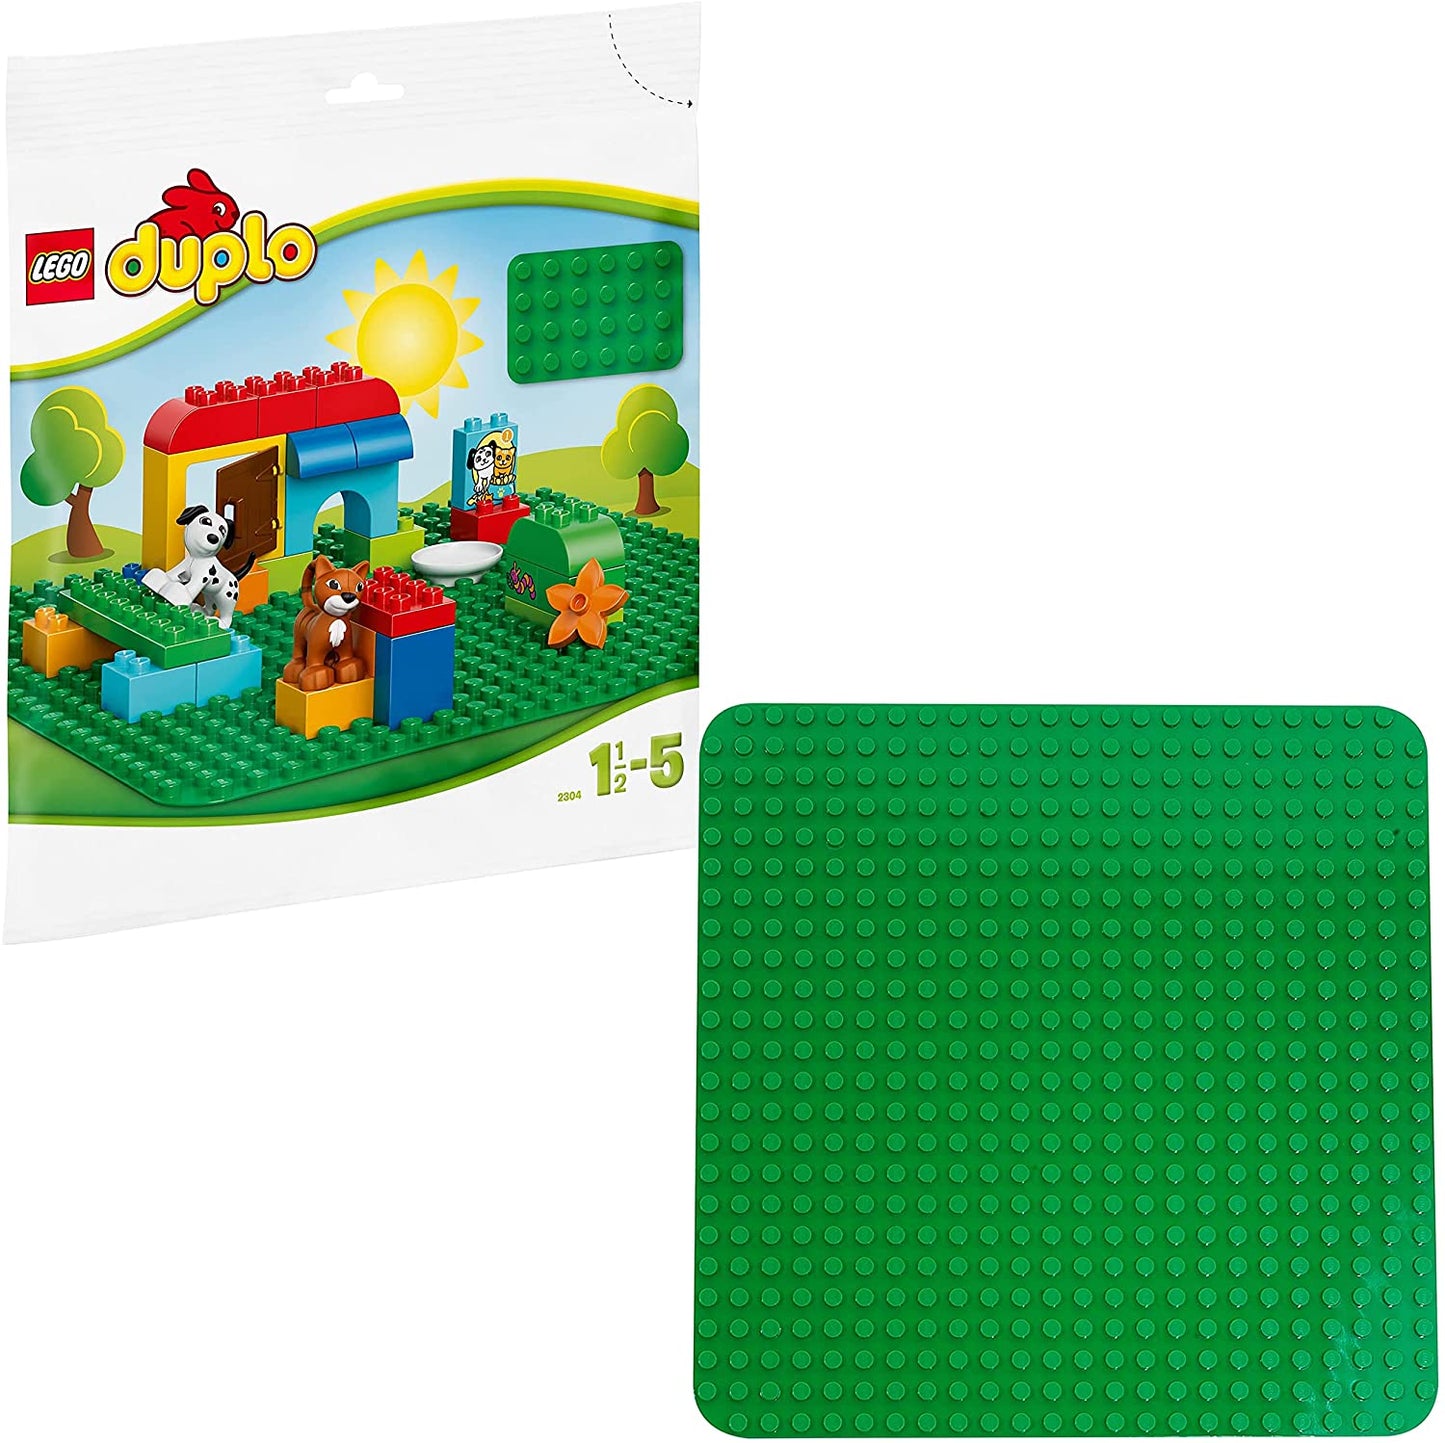 LEGO DUPLO - Classic Large Green Building Plate 2304